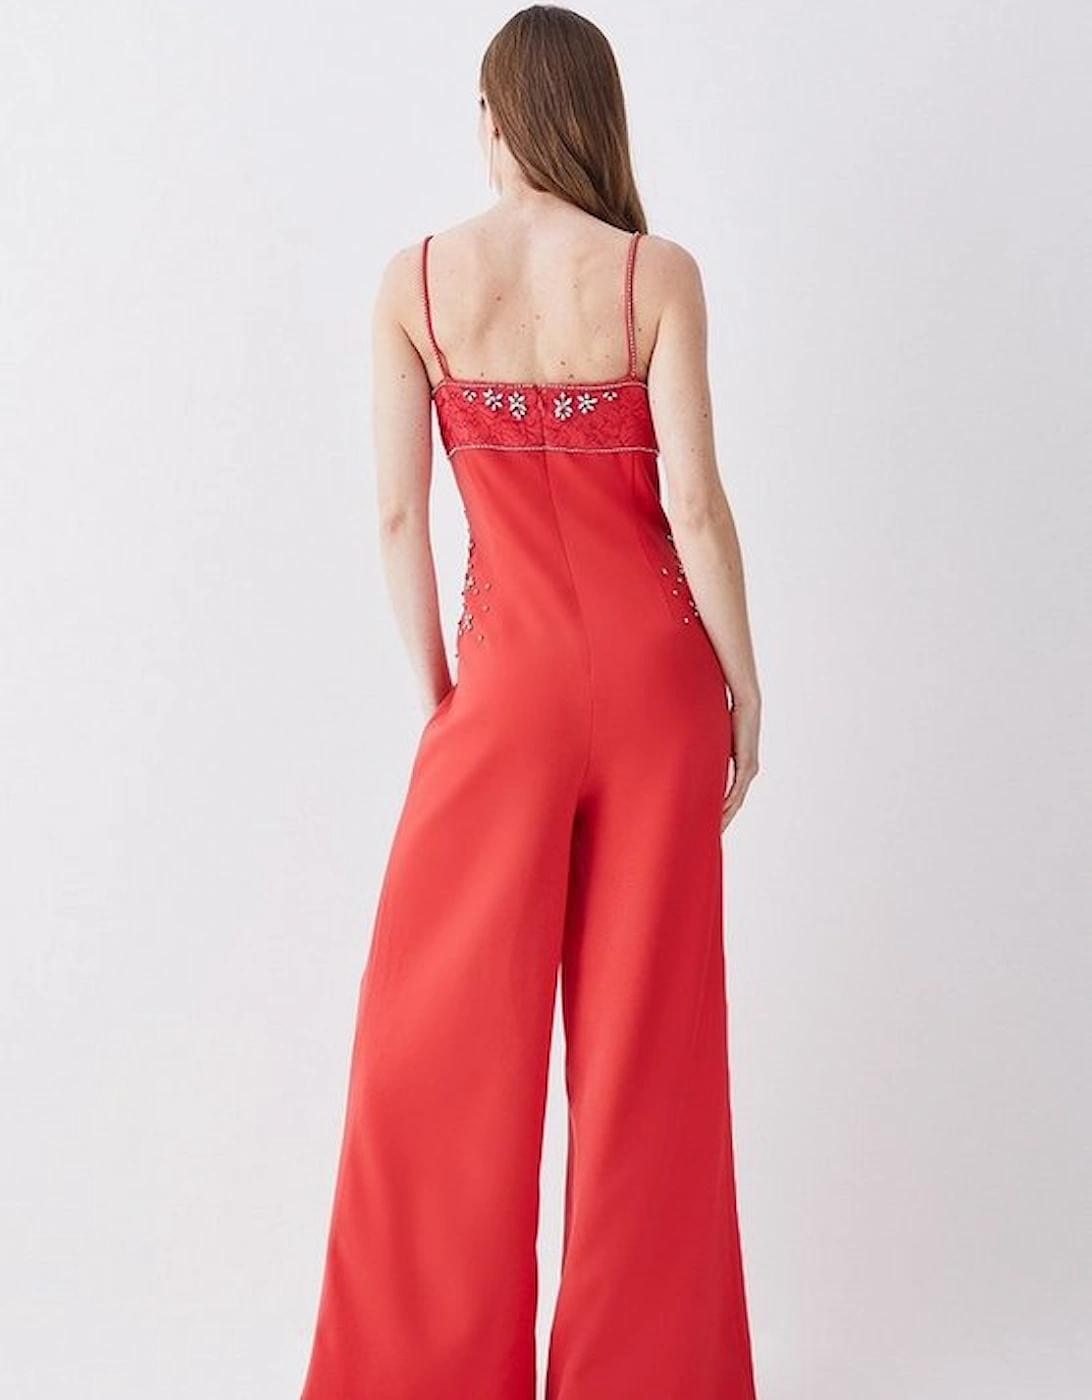 Embellished Lace Mix Strappy Woven Jumpsuit